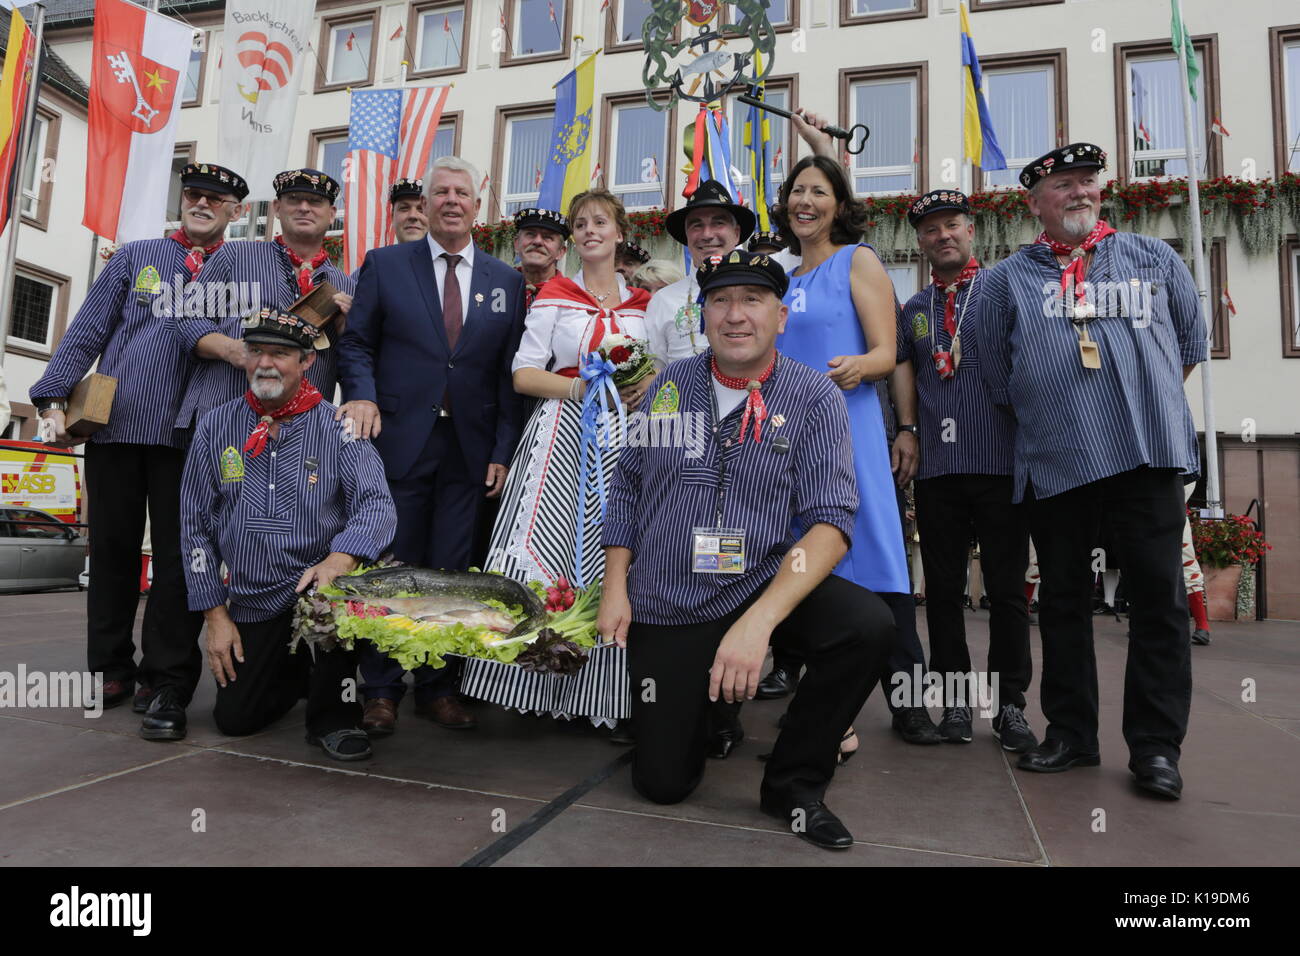 Worms, Germany. 26th August 2017. The Lord Mayor of Worms, Michael Kissel, the BojemŠŠschter vun de FischerwŠŠd (mayor of the fishermenÕs lea), Markus Trapp, his bride Franziska Henrici, Daniela Schmitt and representatives of the old fishermen's Guild of Worms pose for the cameras. The largest wine and funfair along the Rhine, the Backfischfest started in Worms with the traditional handing over of power from the Lord Mayor to the mayor of the fishermenÕs lea. The ceremony was framed by dances and music. Secretary of state Daniela Schmitt from the Rhineland-Palatinate ministry for economy, tran Stock Photo